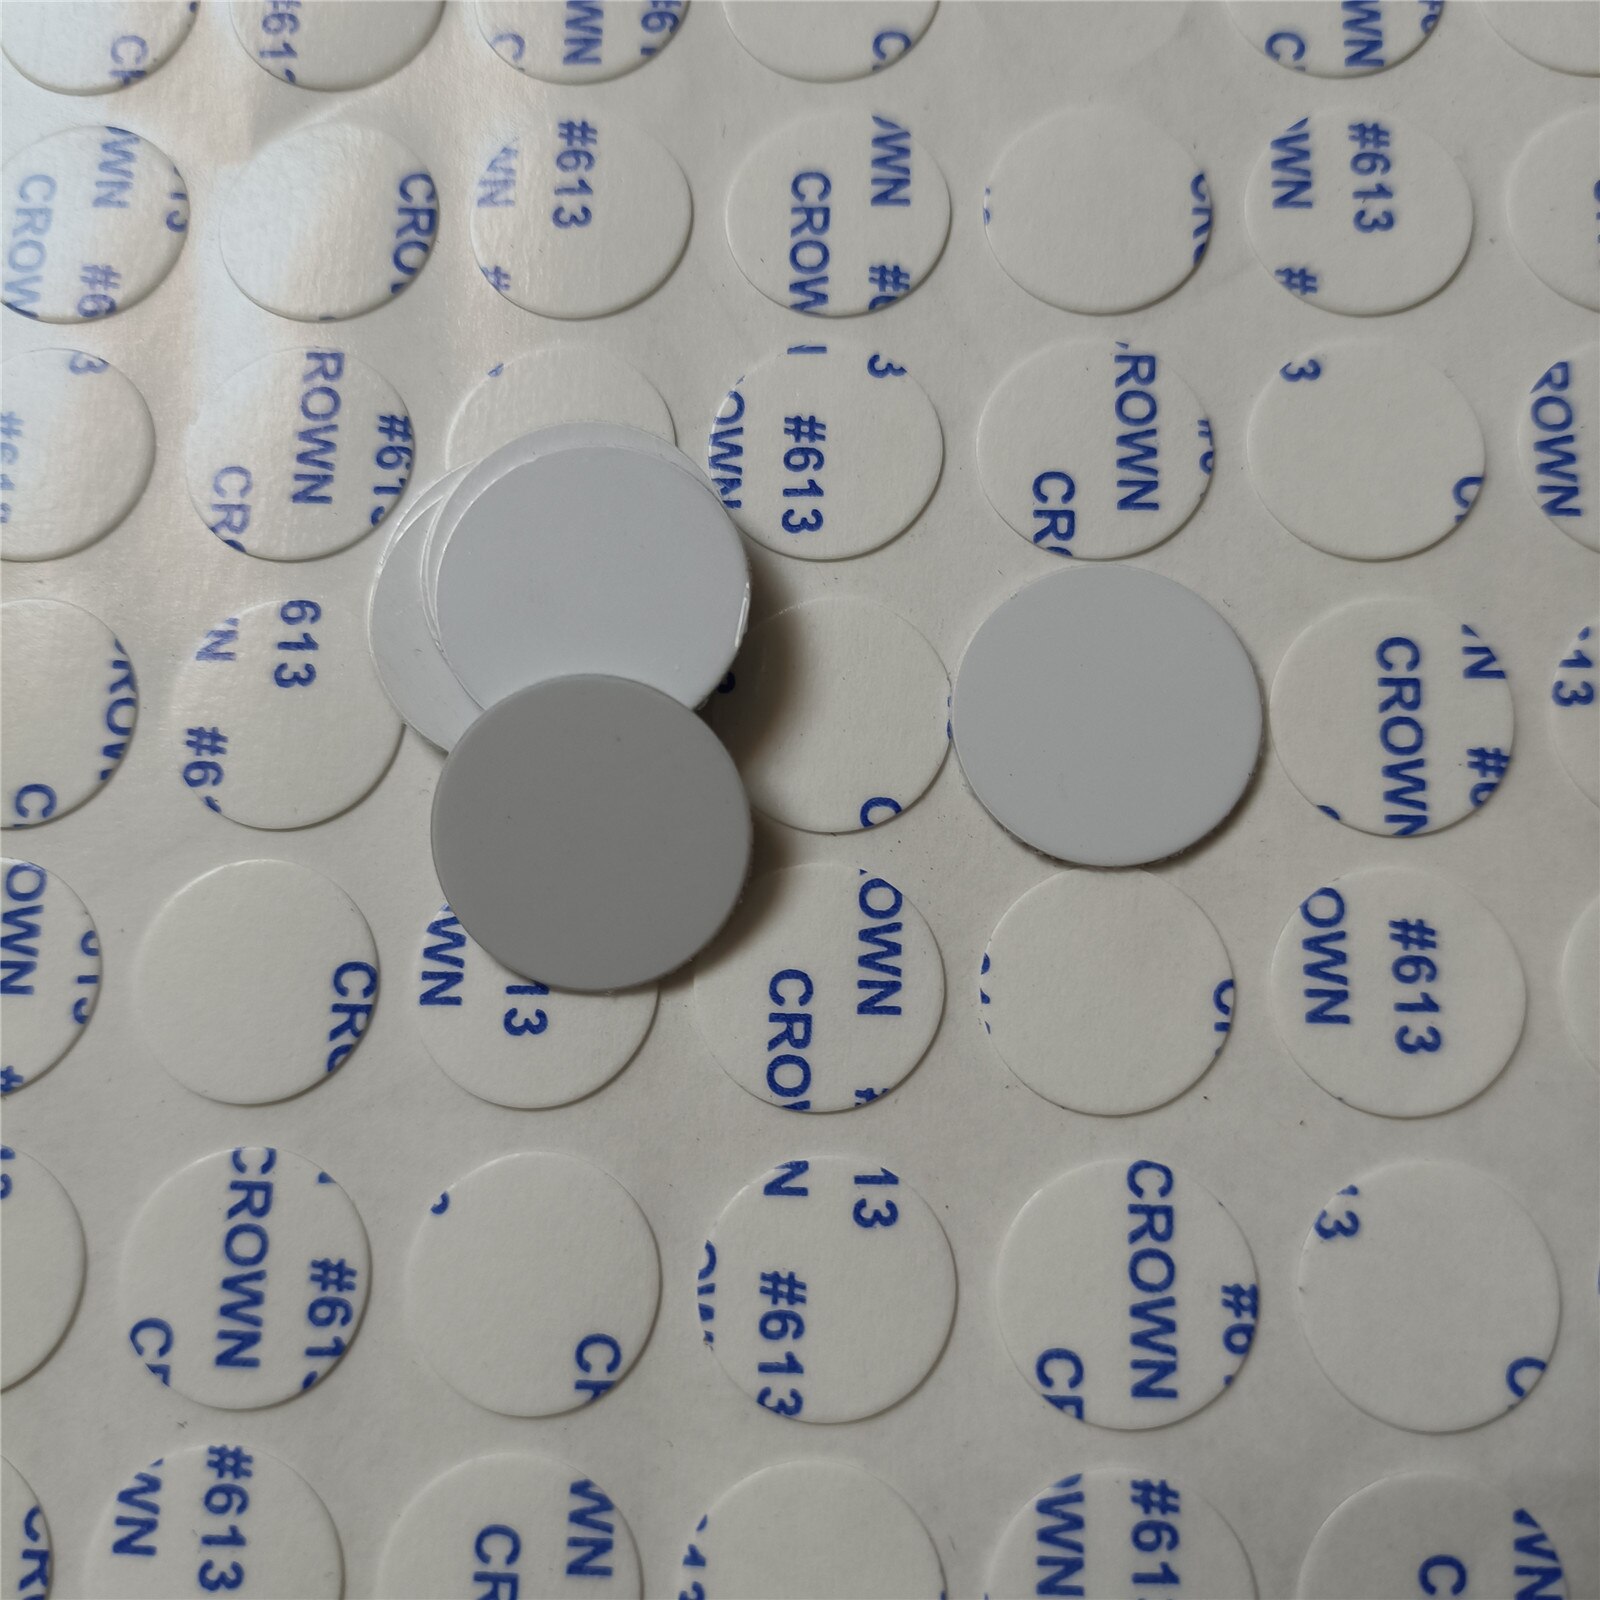 50pcs/lot Blank Sublimable Round Aluminum Patch 16mm 18mm 20mm 25mm 30mm 38mm Diameter 1.6cm 1.8cm 2cm 2.5cm 3cm 3.8cm: 18mm Patch and Tape